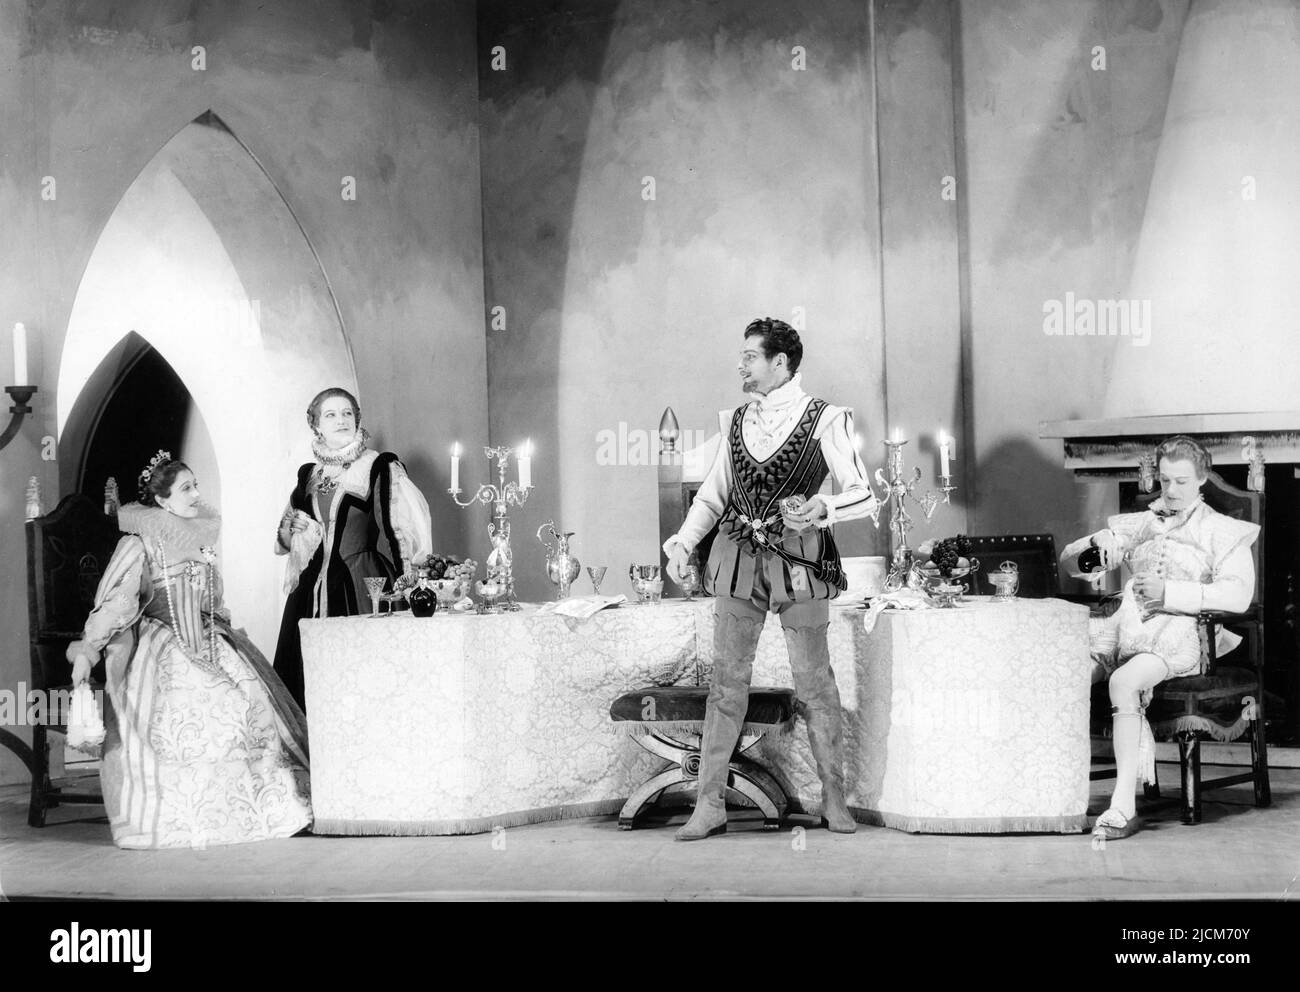 GWEN FFRANGCON-DAVIES as Mary, MARGARET WEBSTER as Mary Beaton LAURENCE OLIVIER as Bothwell and GLENN BYAM SHAW as Darnley in QUEEN OF SCOTS 1934 writer Gordon Daviot director John Gielgud at the New Theatre in London Stock Photo